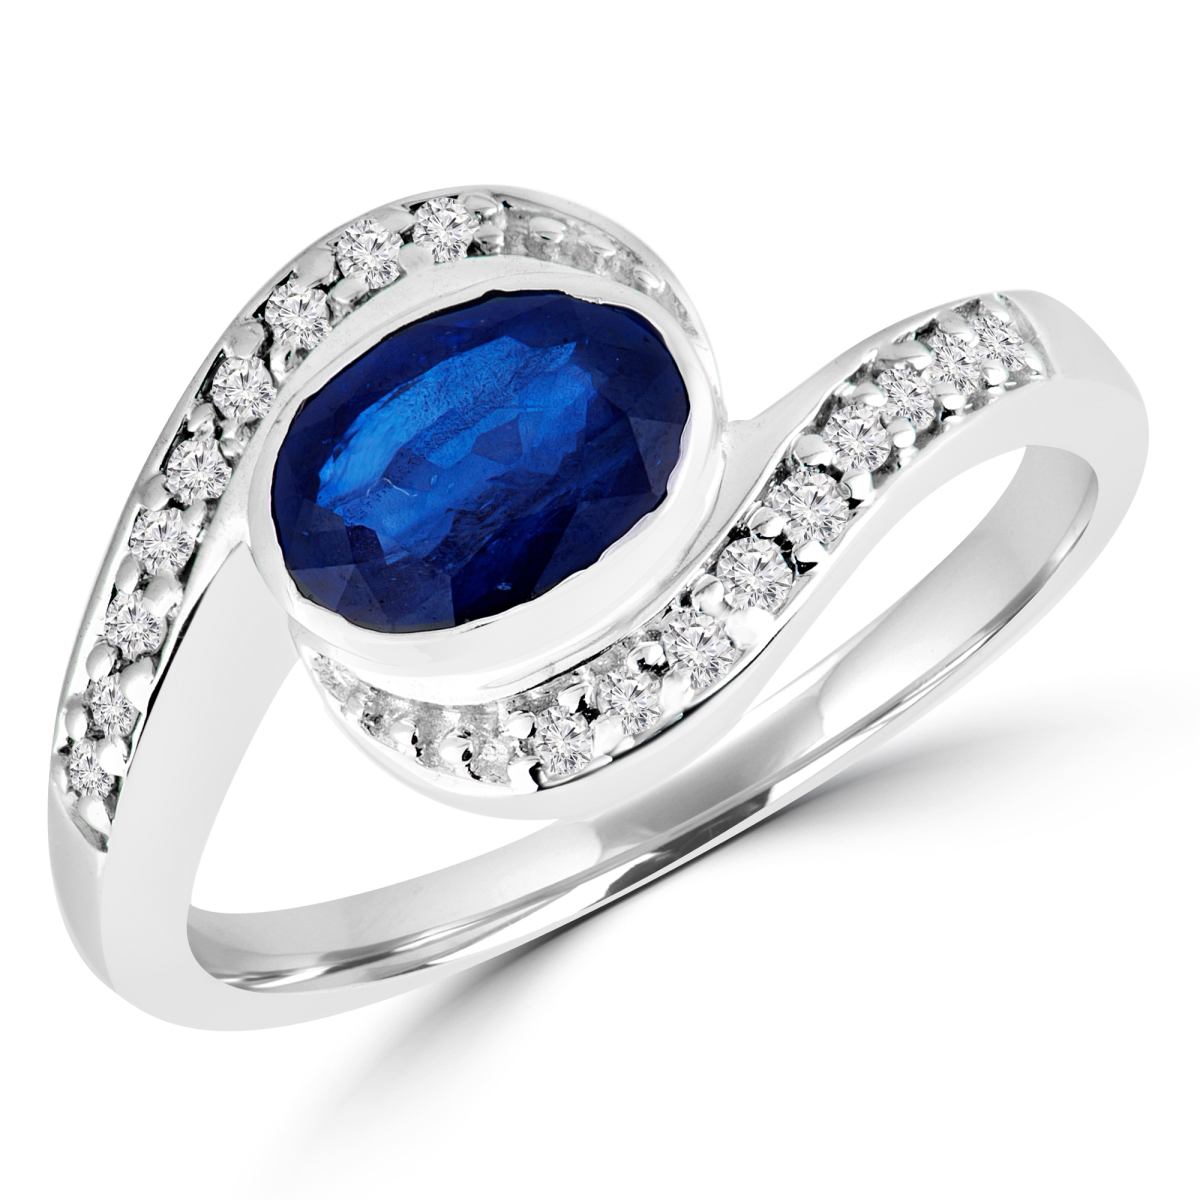 Picture of Majesty Diamonds MDR170020 1.1 CTW Oval Blue Sapphire Bypass Cocktail Ring in 14K